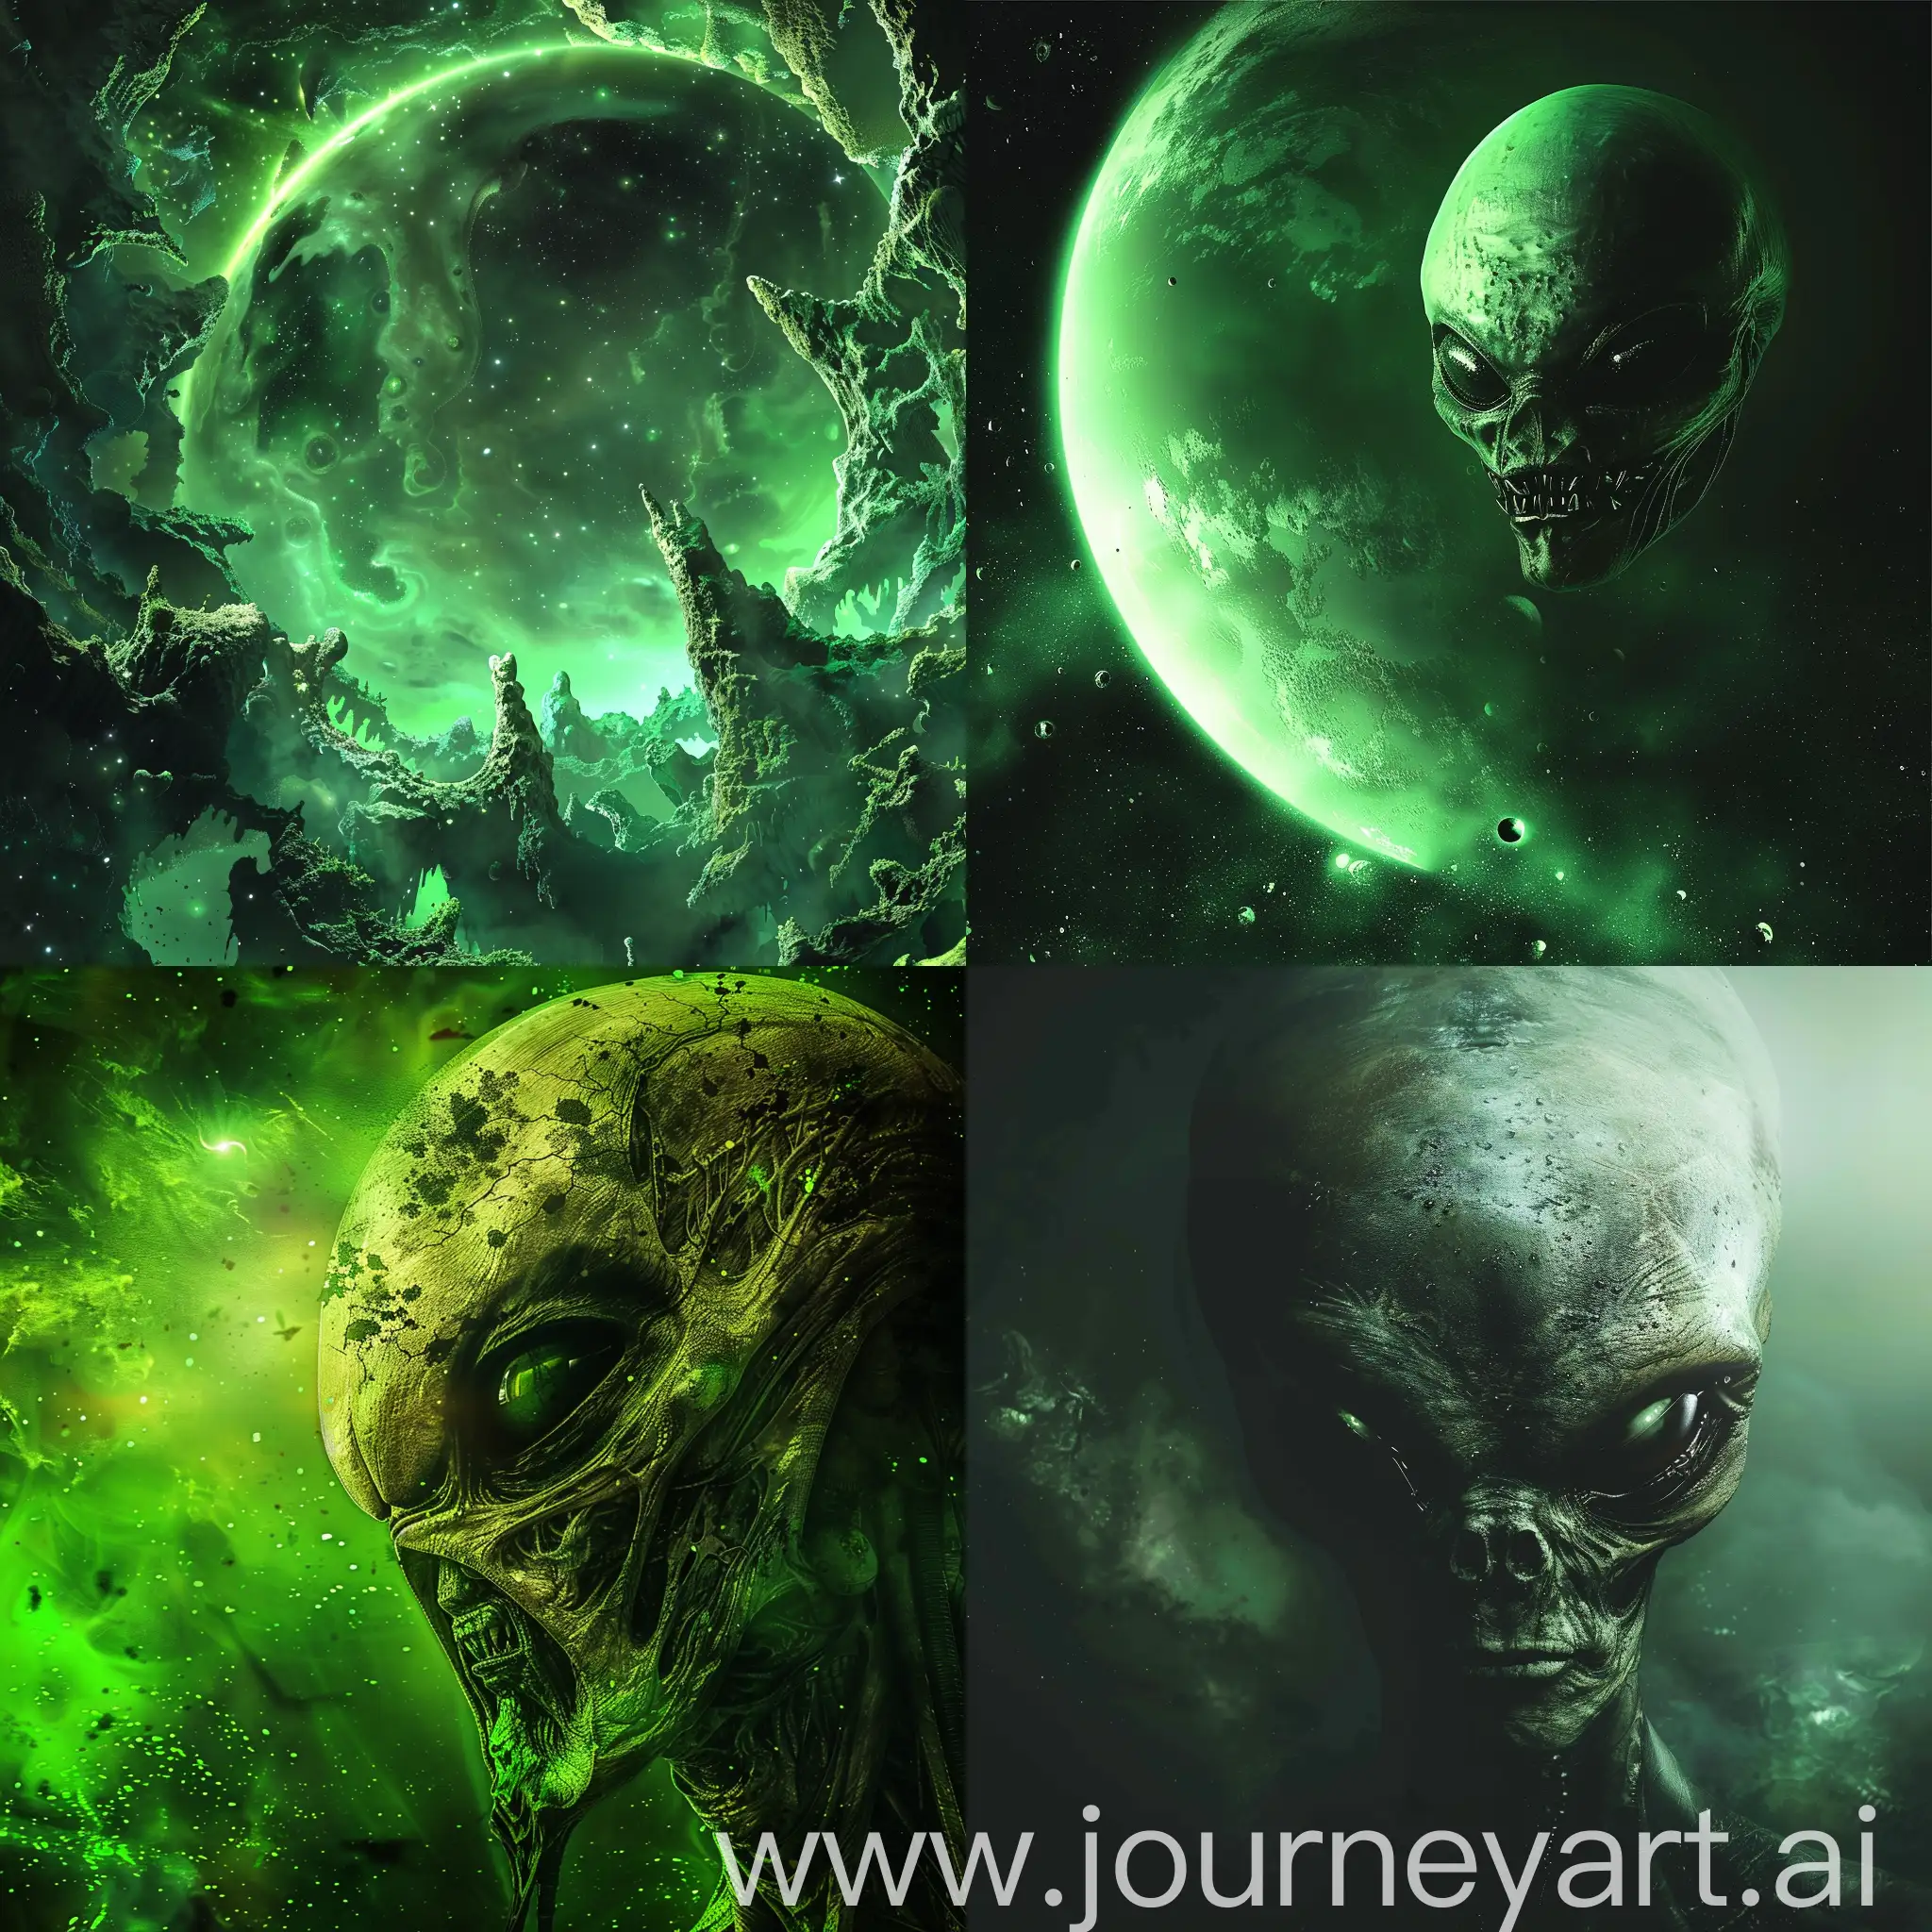 create an alien scary wplanet, with green atmospher. with a quiet space